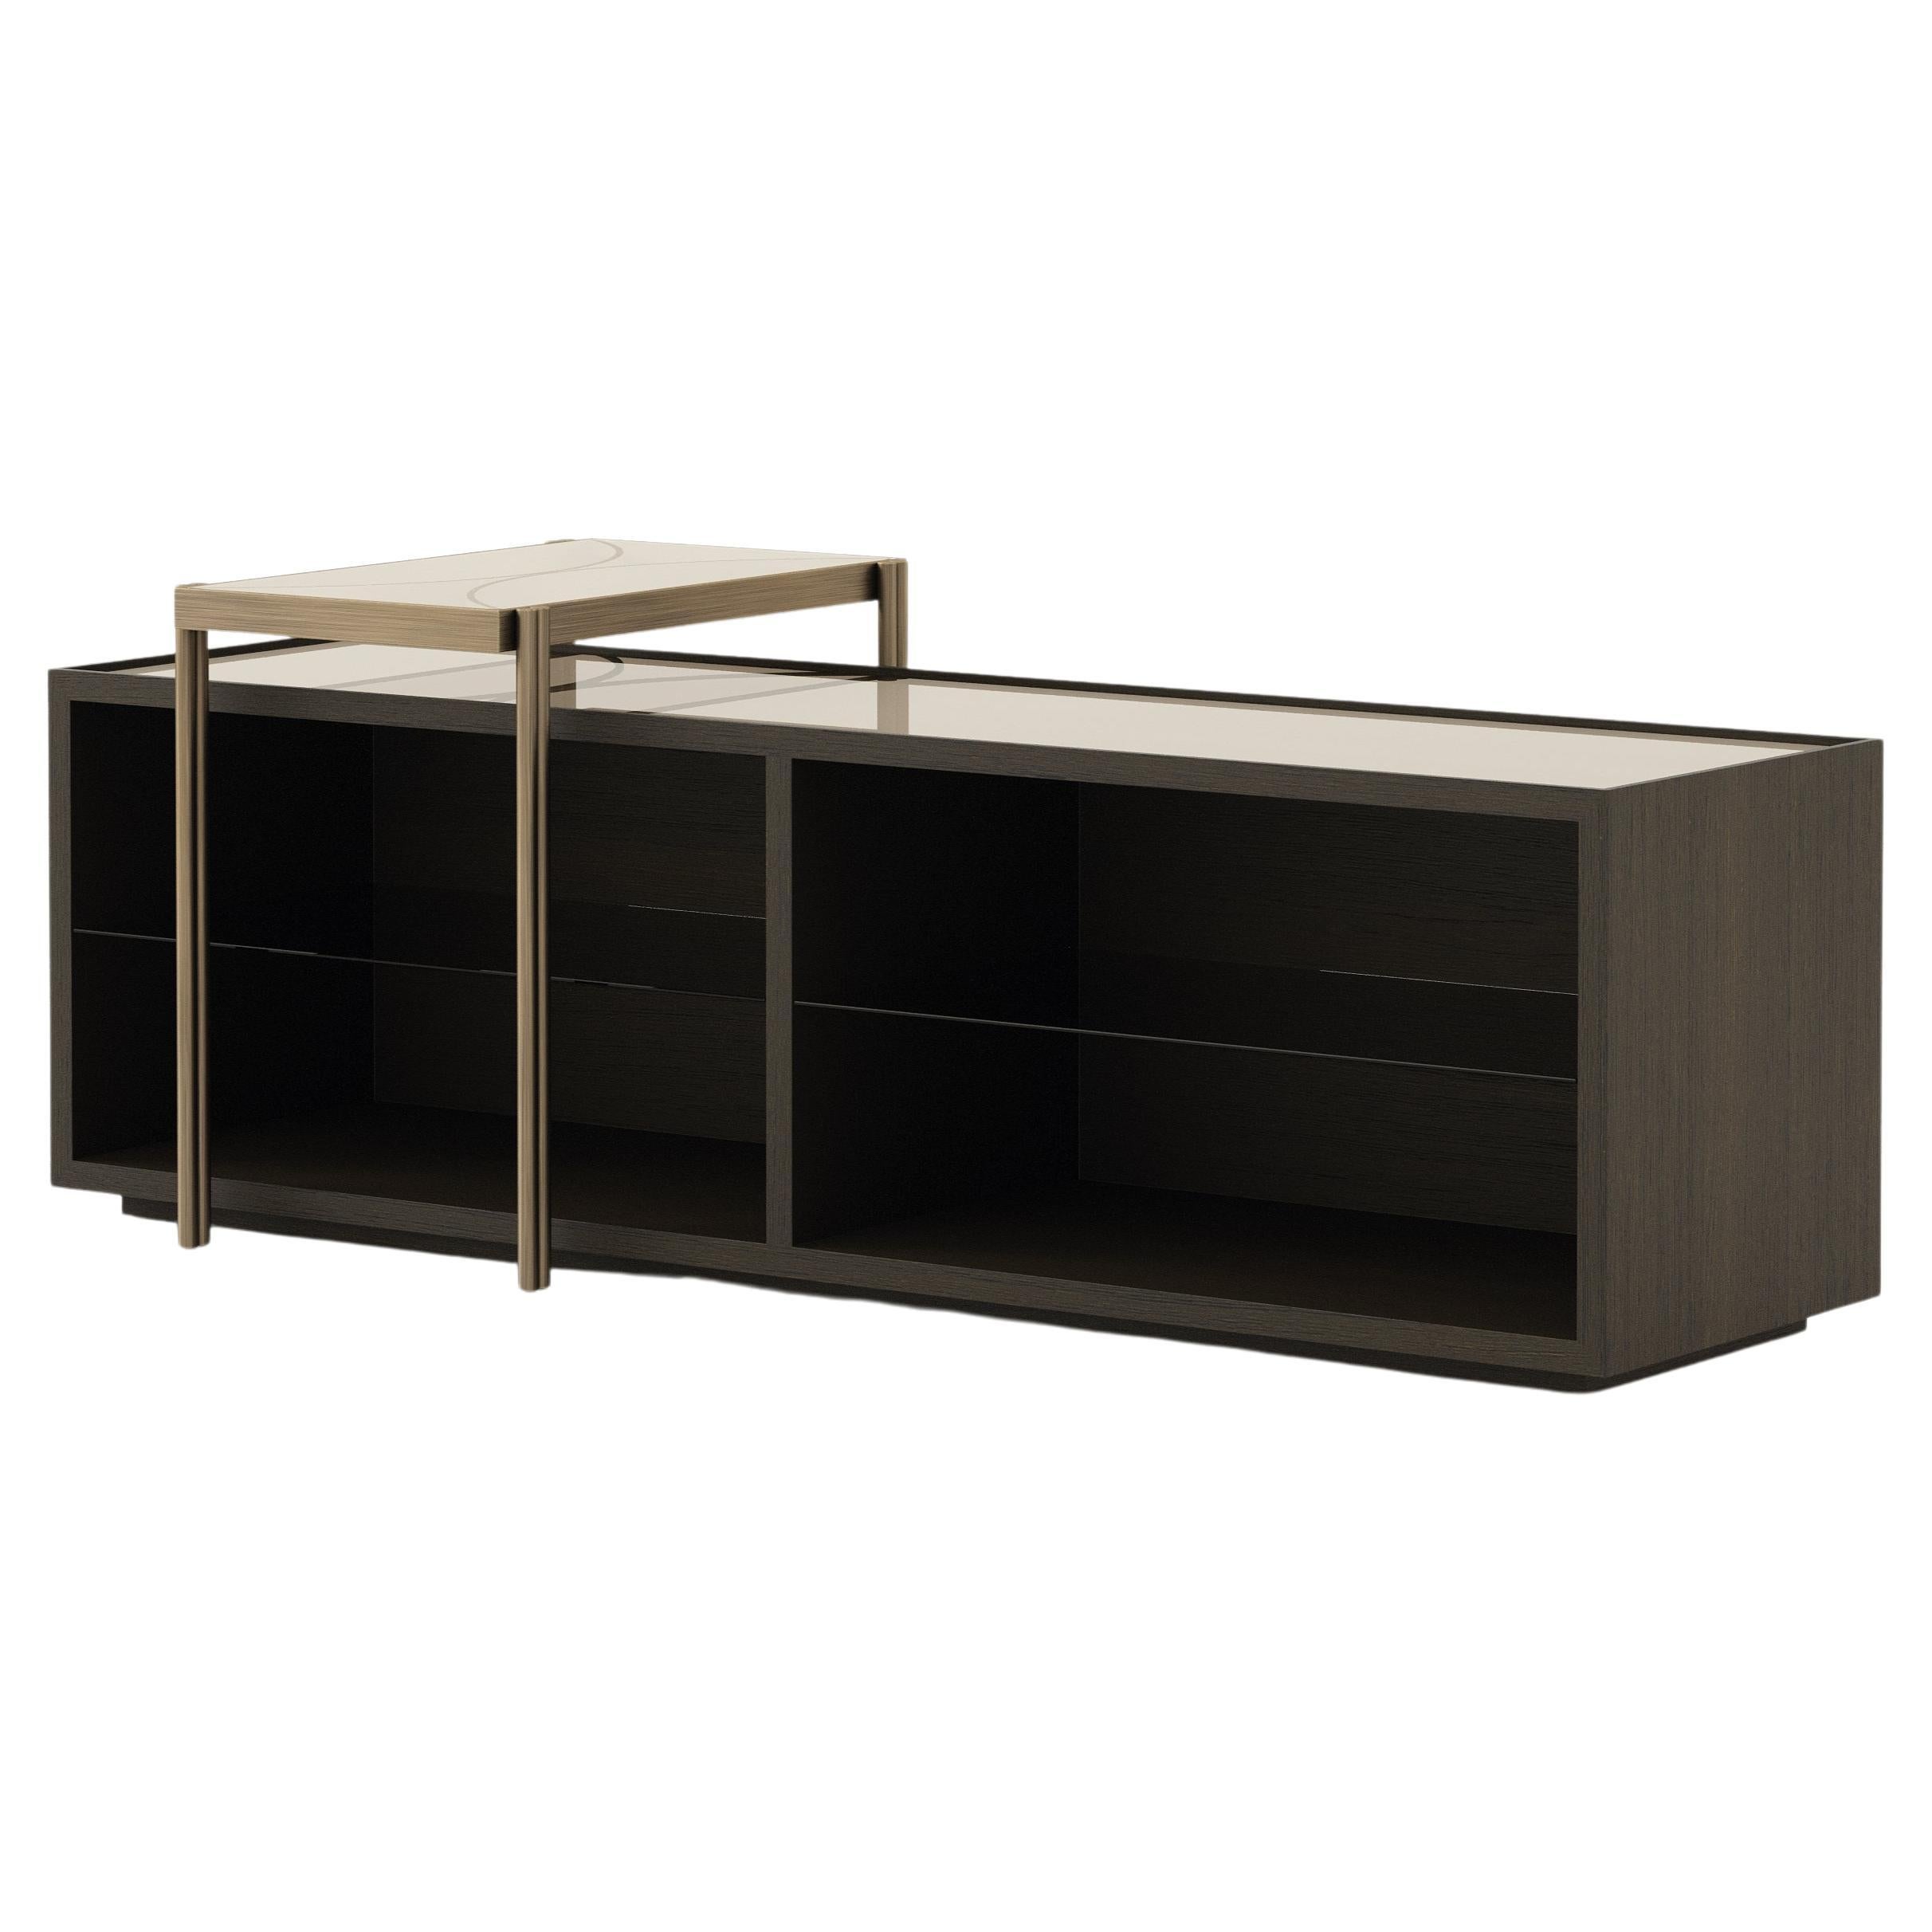 Modern Club Console made with Oak, Brass and Glass, handmade by Stylish Club For Sale